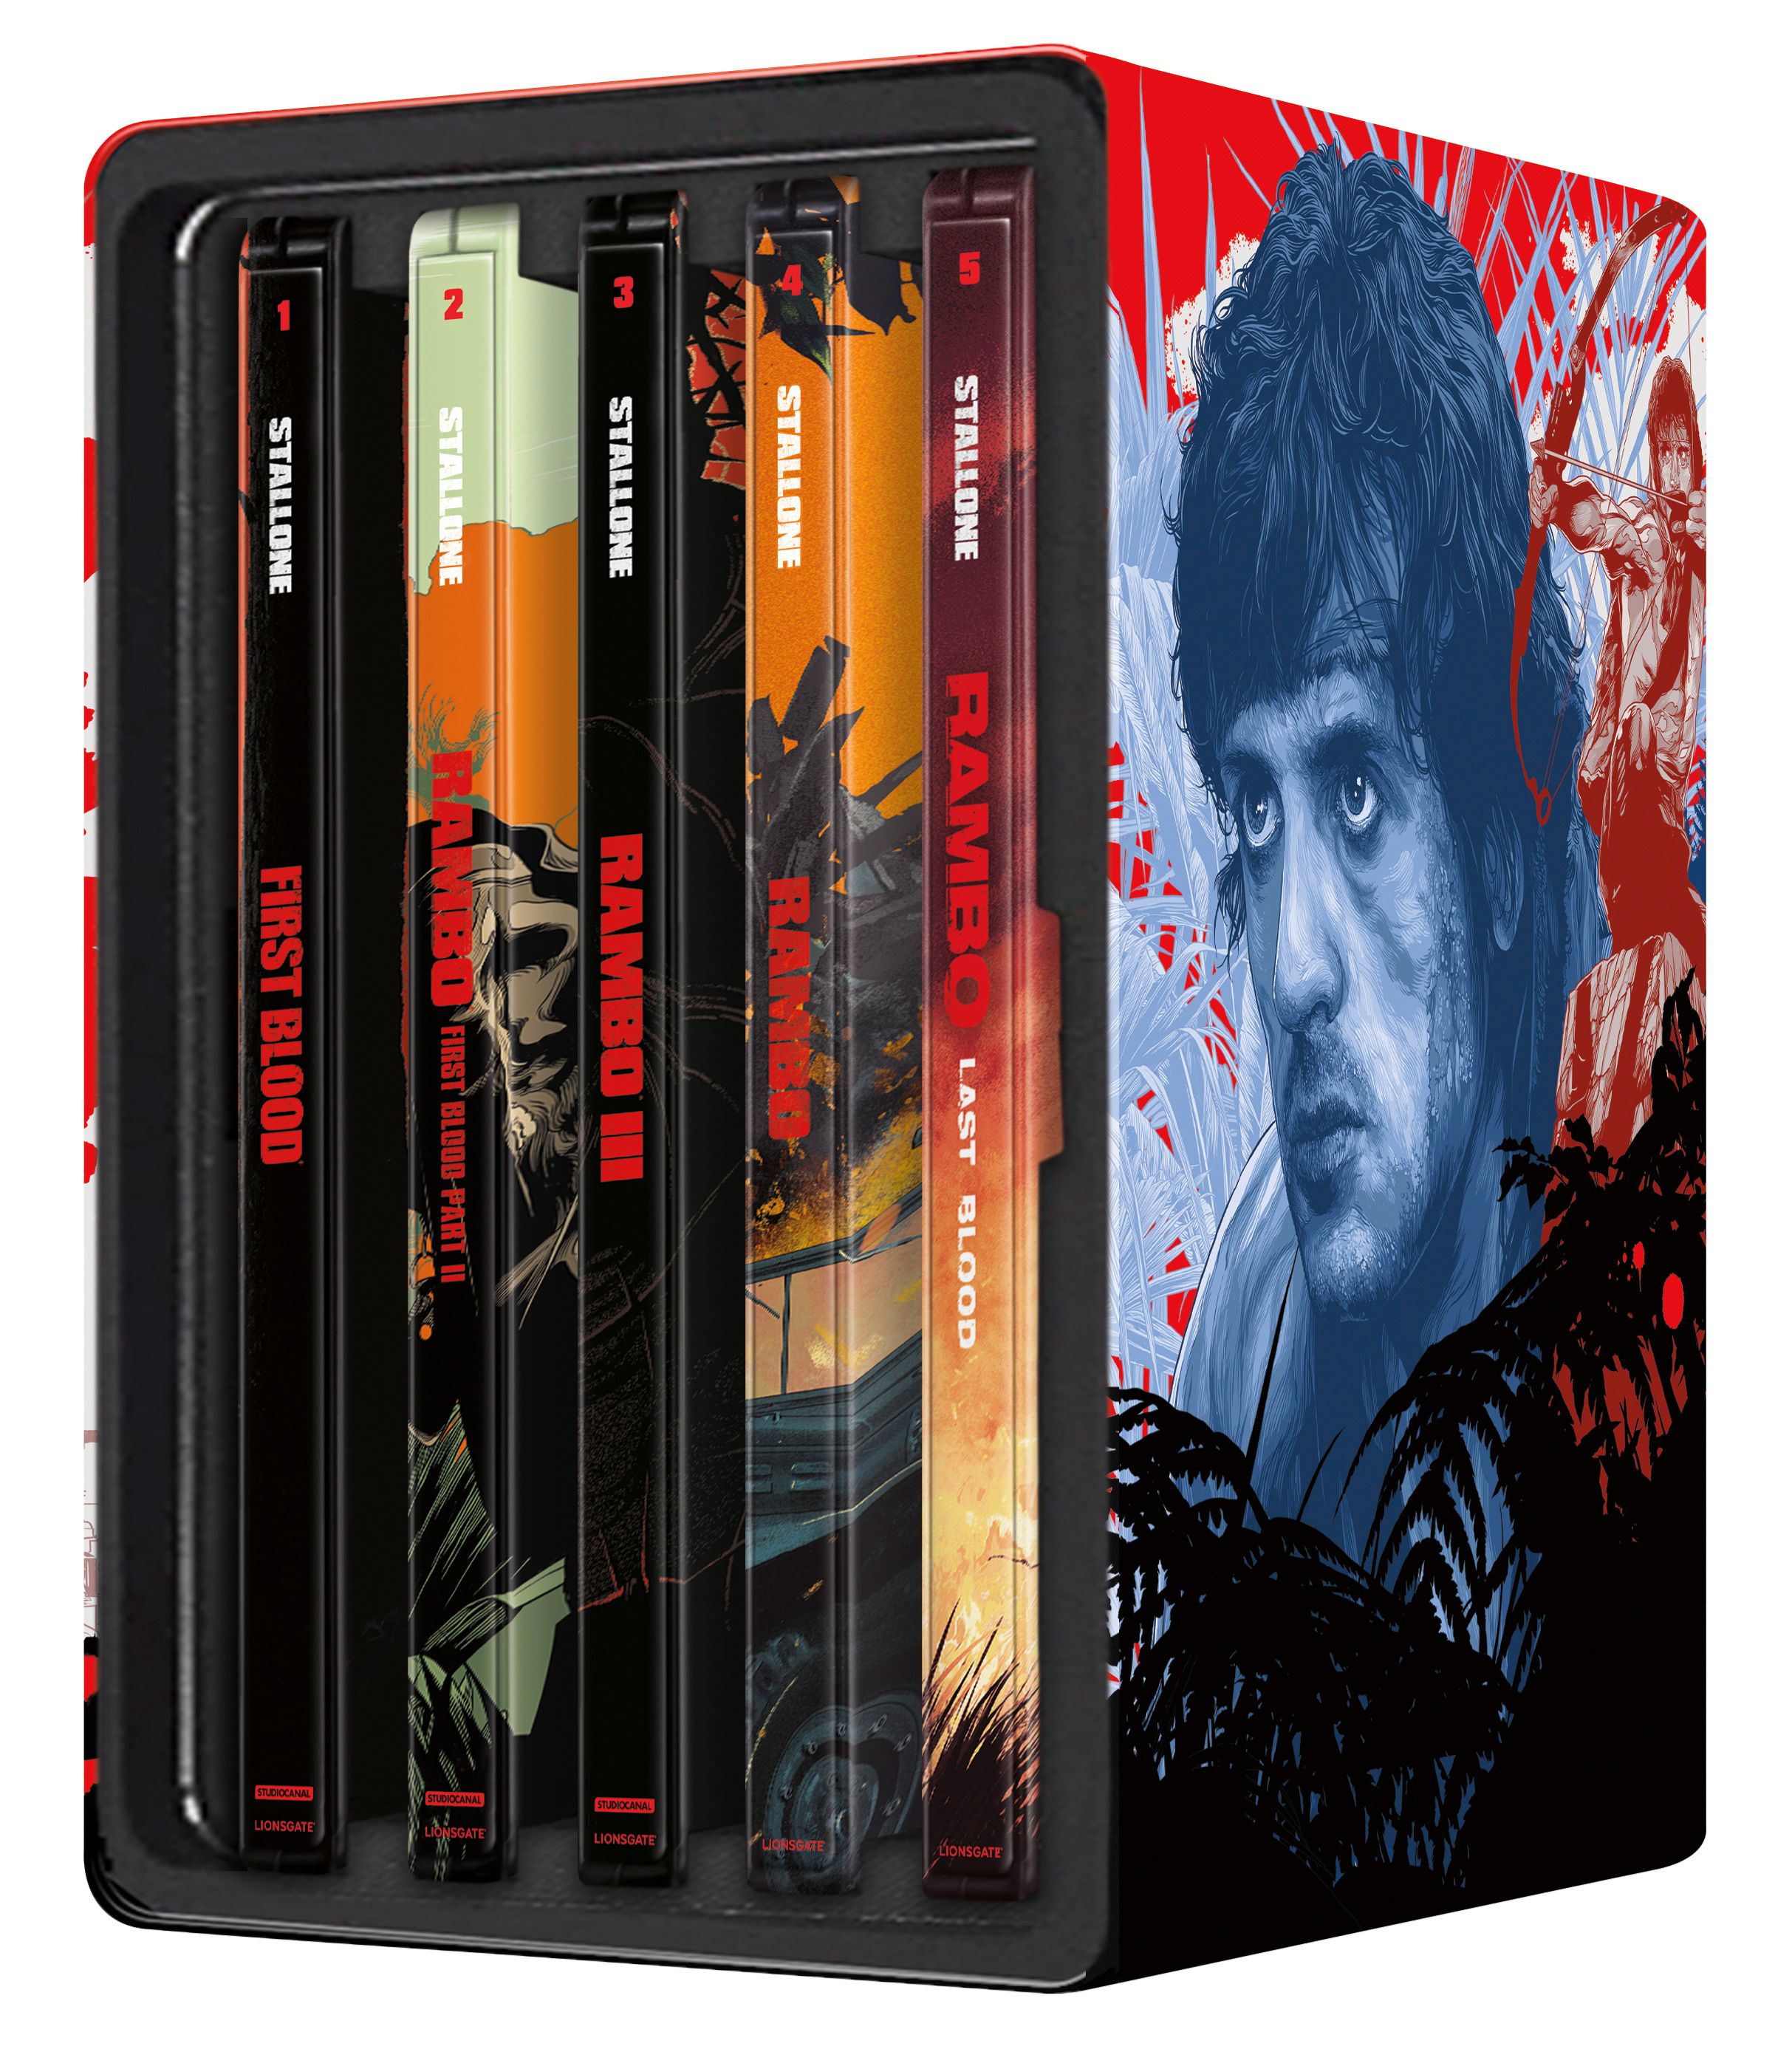 Rambo Steelbook Collection - #8